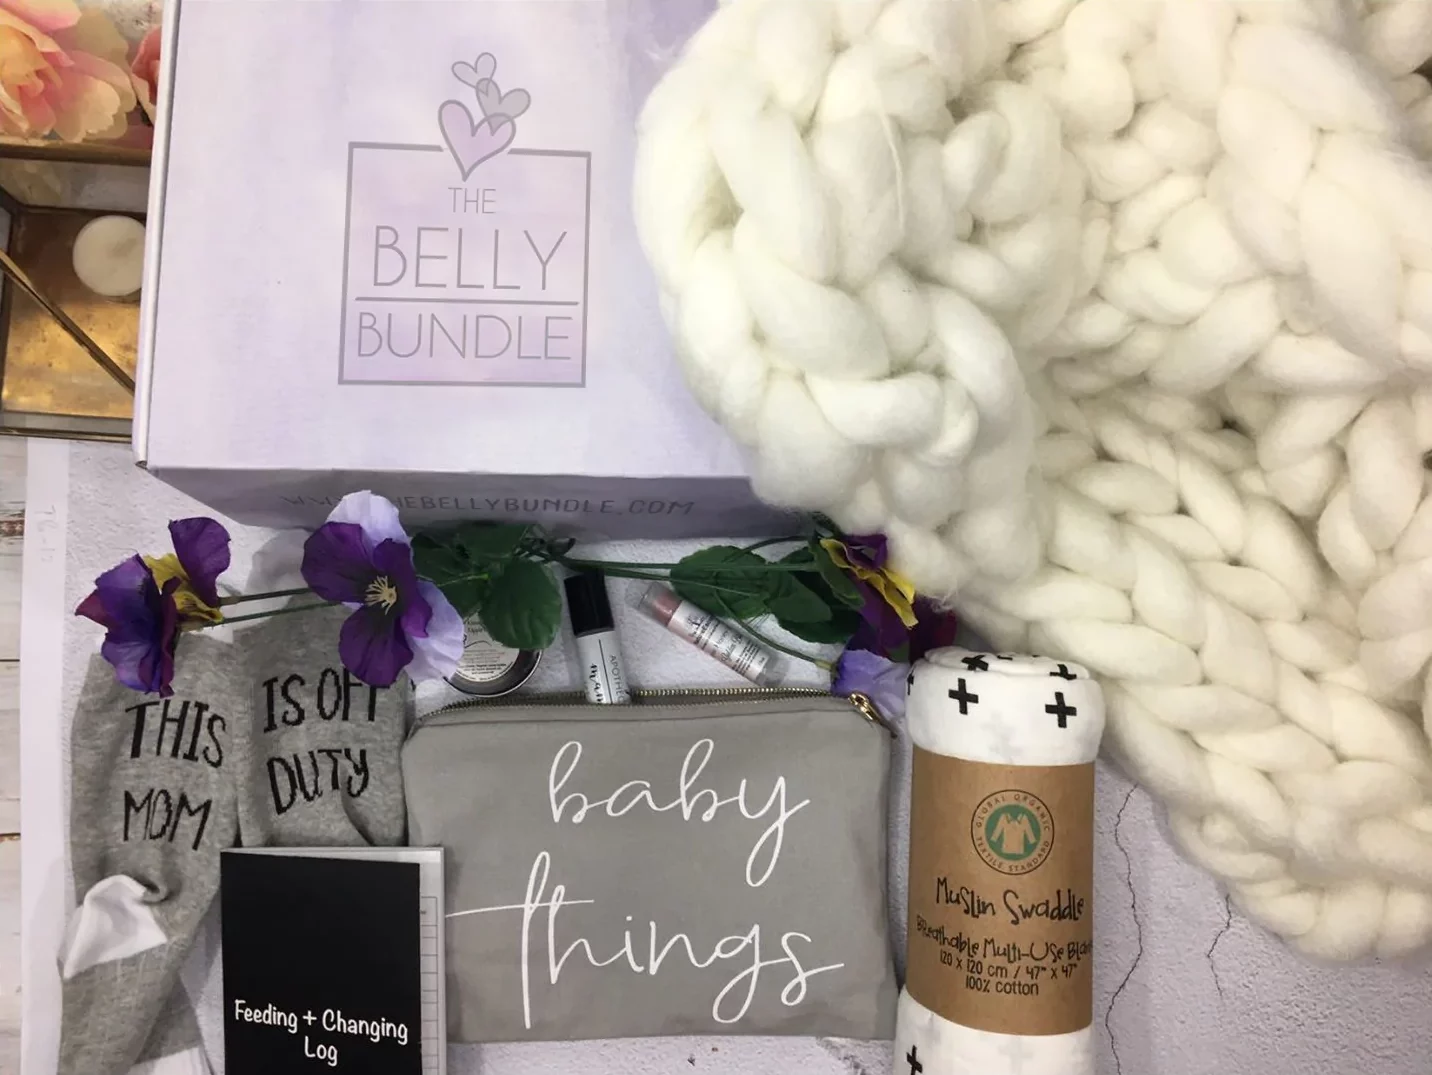 The Belly Bundle Box